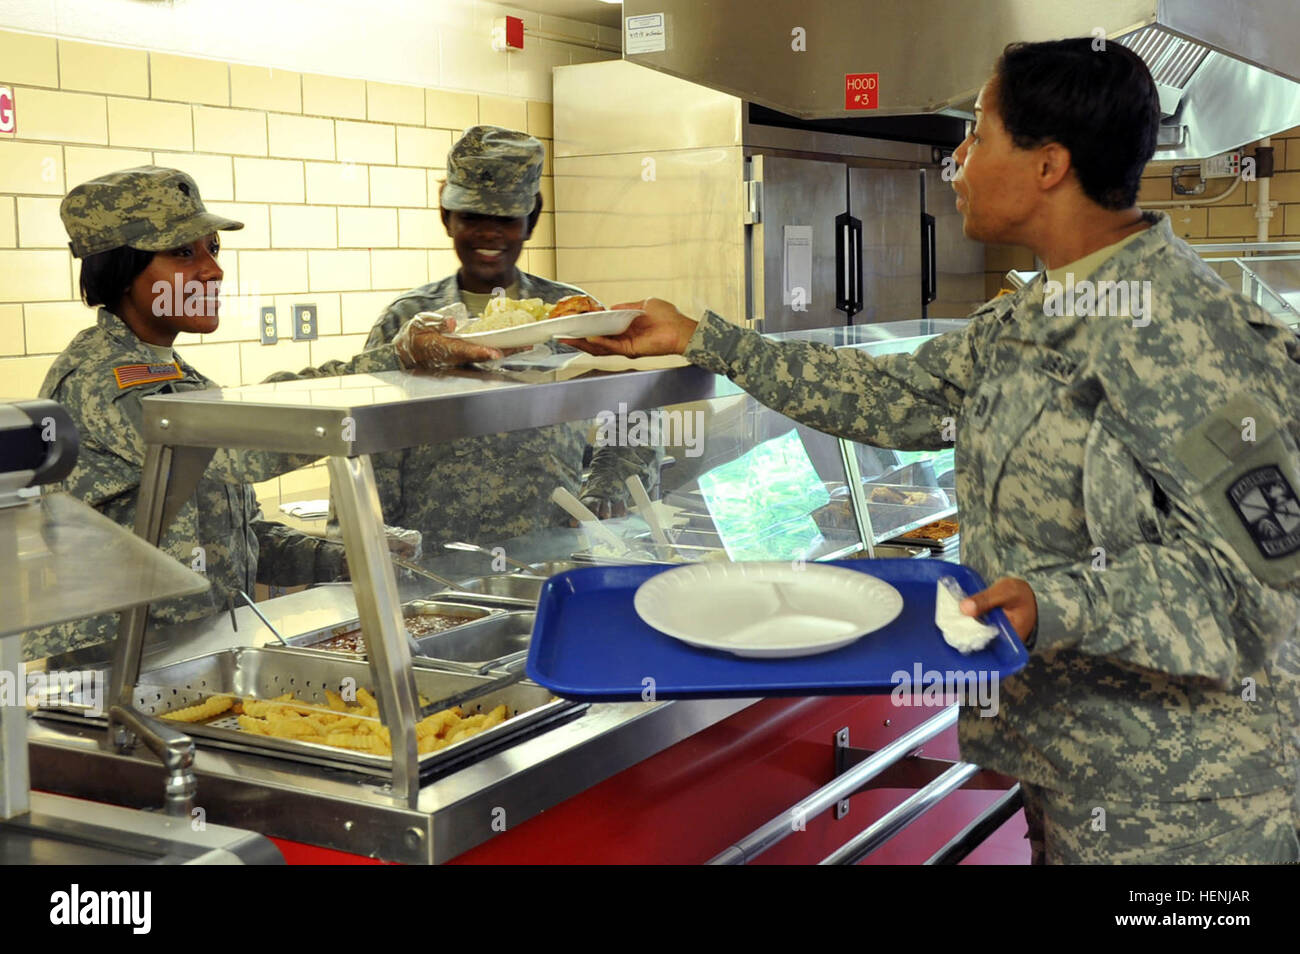 U.S. Army Spc. Coree Annis, left, and Sgt. Markeada Smith, center, both food service specialists with Task Force Wolf, serve Capt. Annette Williams, with Task Force Gold, during lunch service for Cadet Summer Training at Fort Knox, Ky., June 9, 2014.  (U.S. Army photo by Staff Sgt. Shejal Pulivarti/Released).... U.S. Army Spc. Coree Annis, left, and Sgt. Markeada Smith, center, both food service specialists with Task Force Wolf, serve Capt. Annette Williams, with Task Force Gold, during lunch service for Cadet Summer 140609-A-IO170-010 Stock Photo